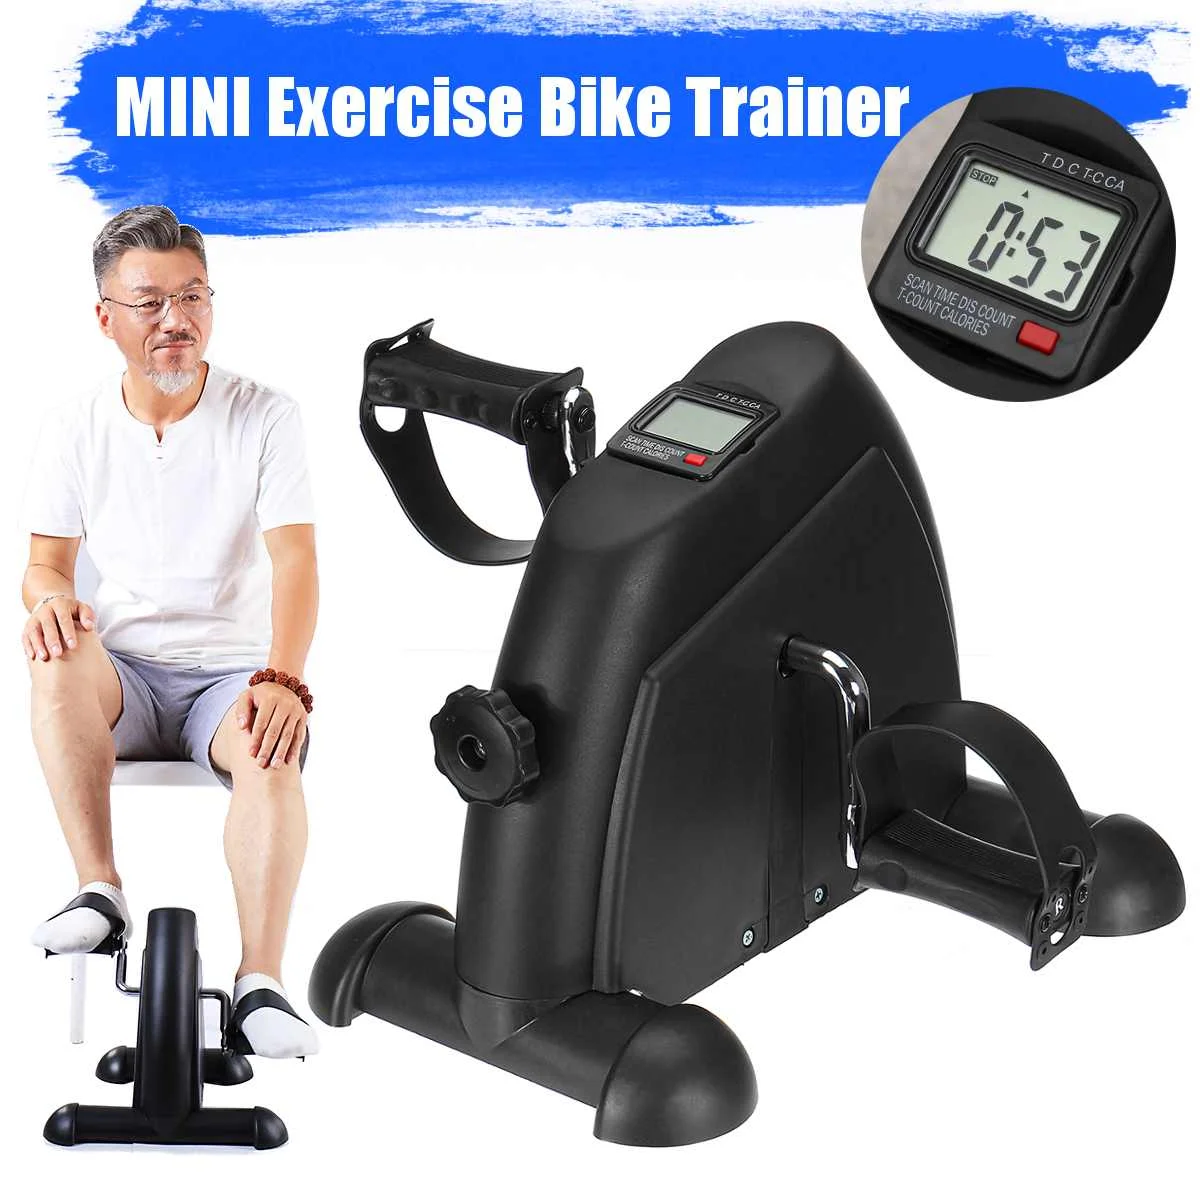 Details about   Mini Bike Trainer Pedal Exerciser Gym Fitness Exercise CycleLeg Training Bicycle 